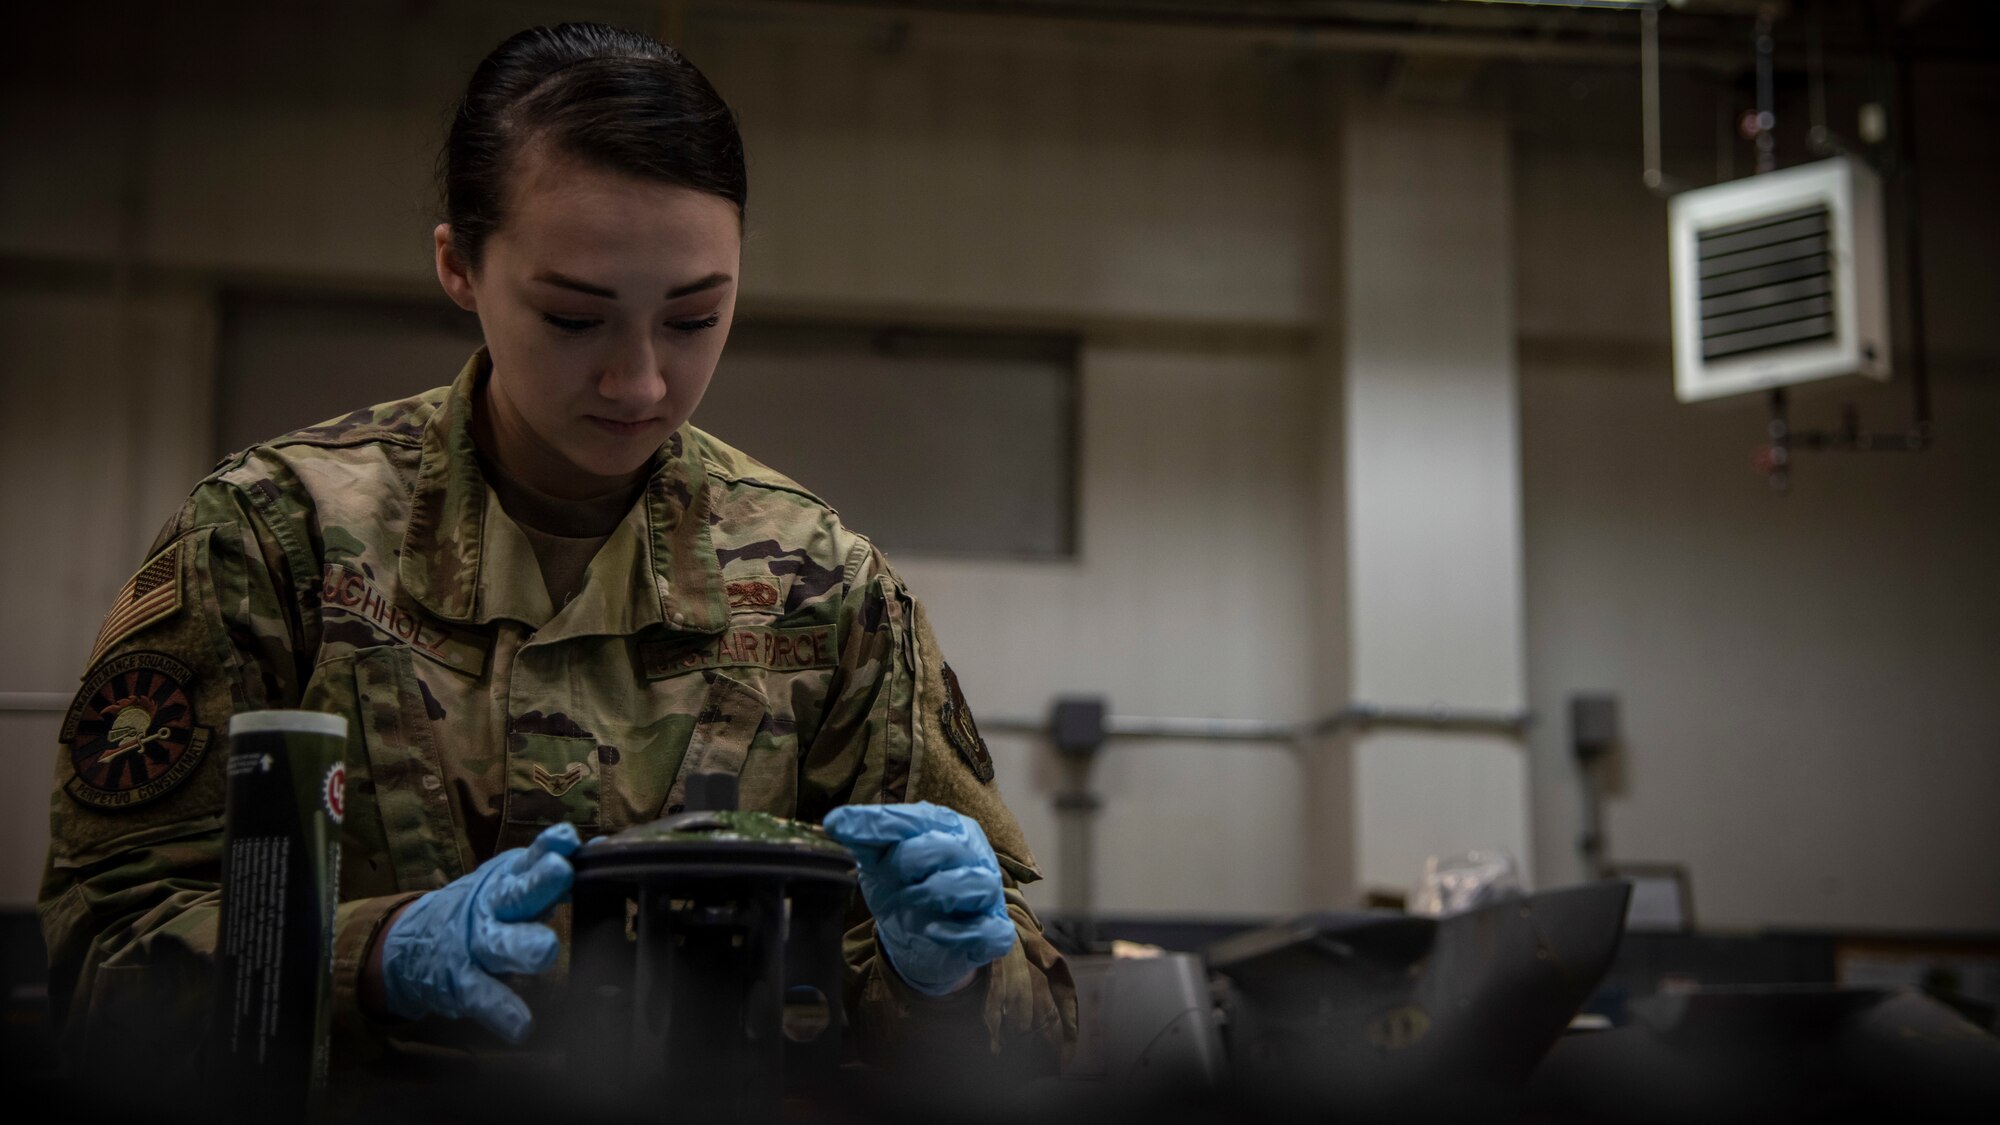 Airman 1st Class Lauren Buchholz, a 35th Maintenance Squadron armament maintenance member, applies lubricant to an M61A1 Vulcan gun system barrel at Misawa Air Base, Japan, Jan. 22, 2020. The almasol syntemp lubricant is used to prevent corrosion and overheating of the barrel. (U.S. Air Force photo by Airman 1st Class China M. Shock)